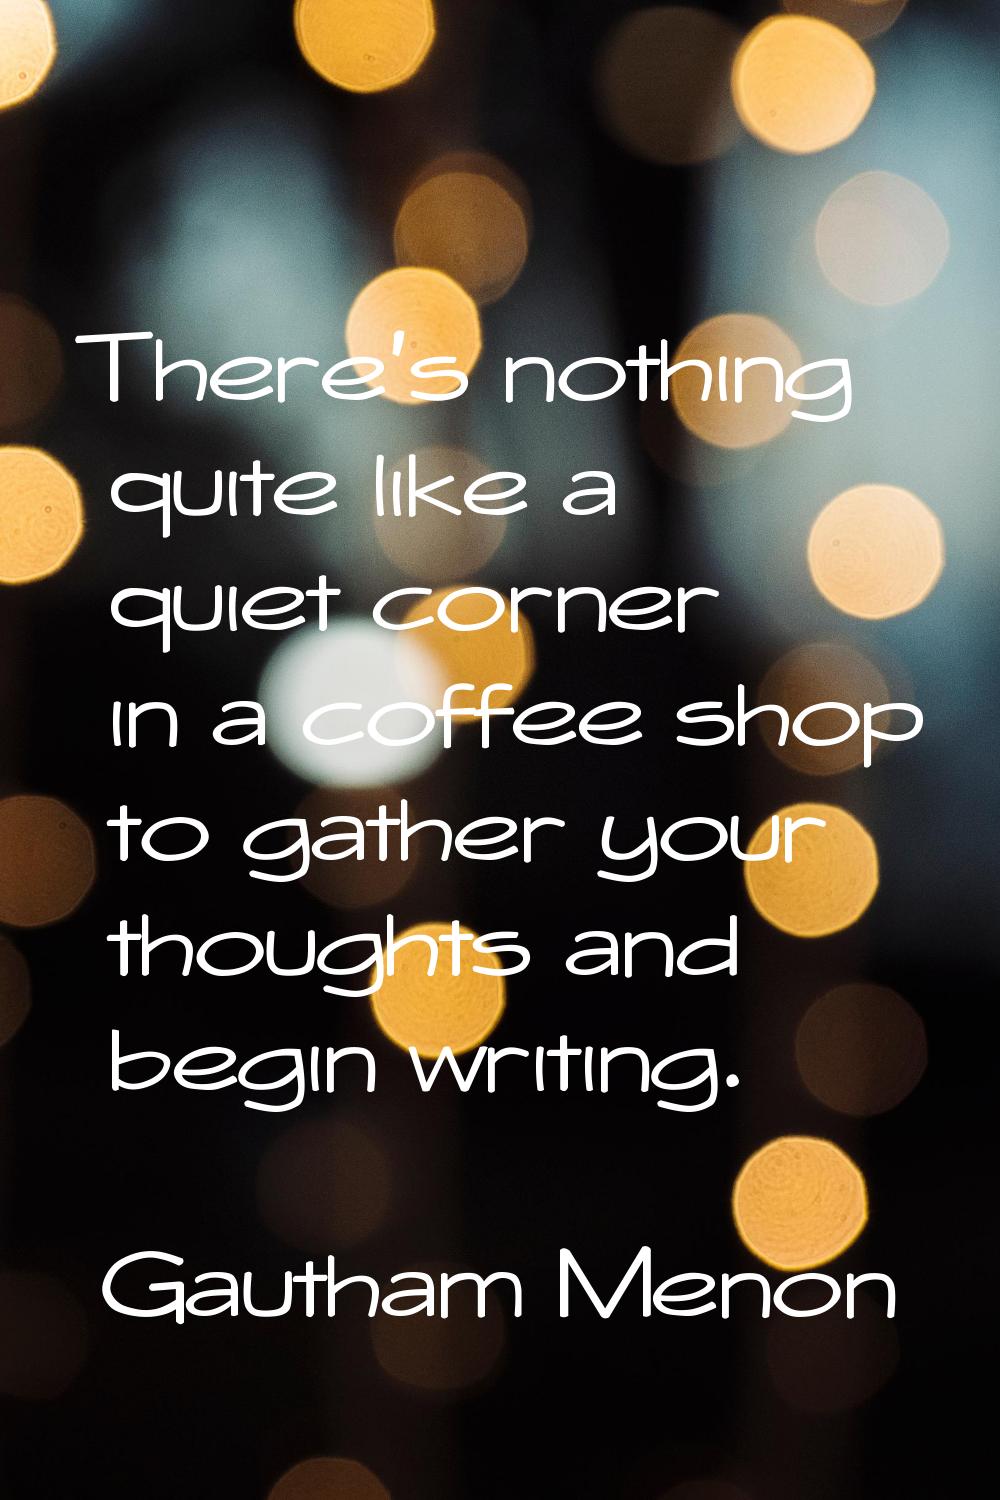 There's nothing quite like a quiet corner in a coffee shop to gather your thoughts and begin writin